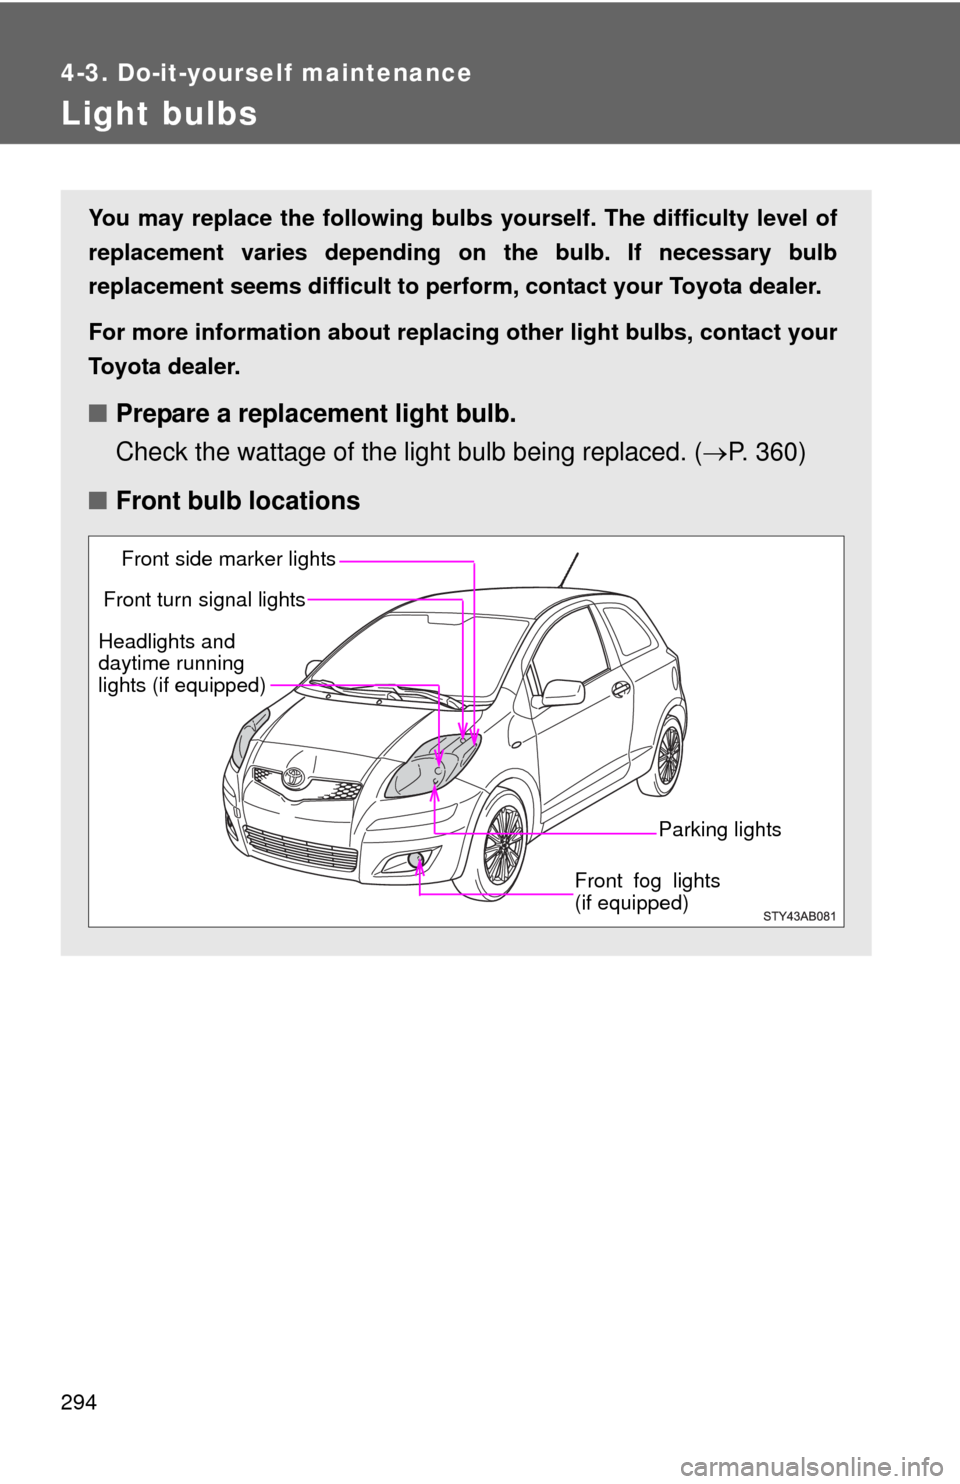 TOYOTA YARIS 2010 3.G Owners Manual 294
4-3. Do-it-yourself maintenance
Light bulbs
You may replace the following bulbs yourself. The difficulty level of
replacement varies depending on the bulb. If necessary bulb
replacement seems diff